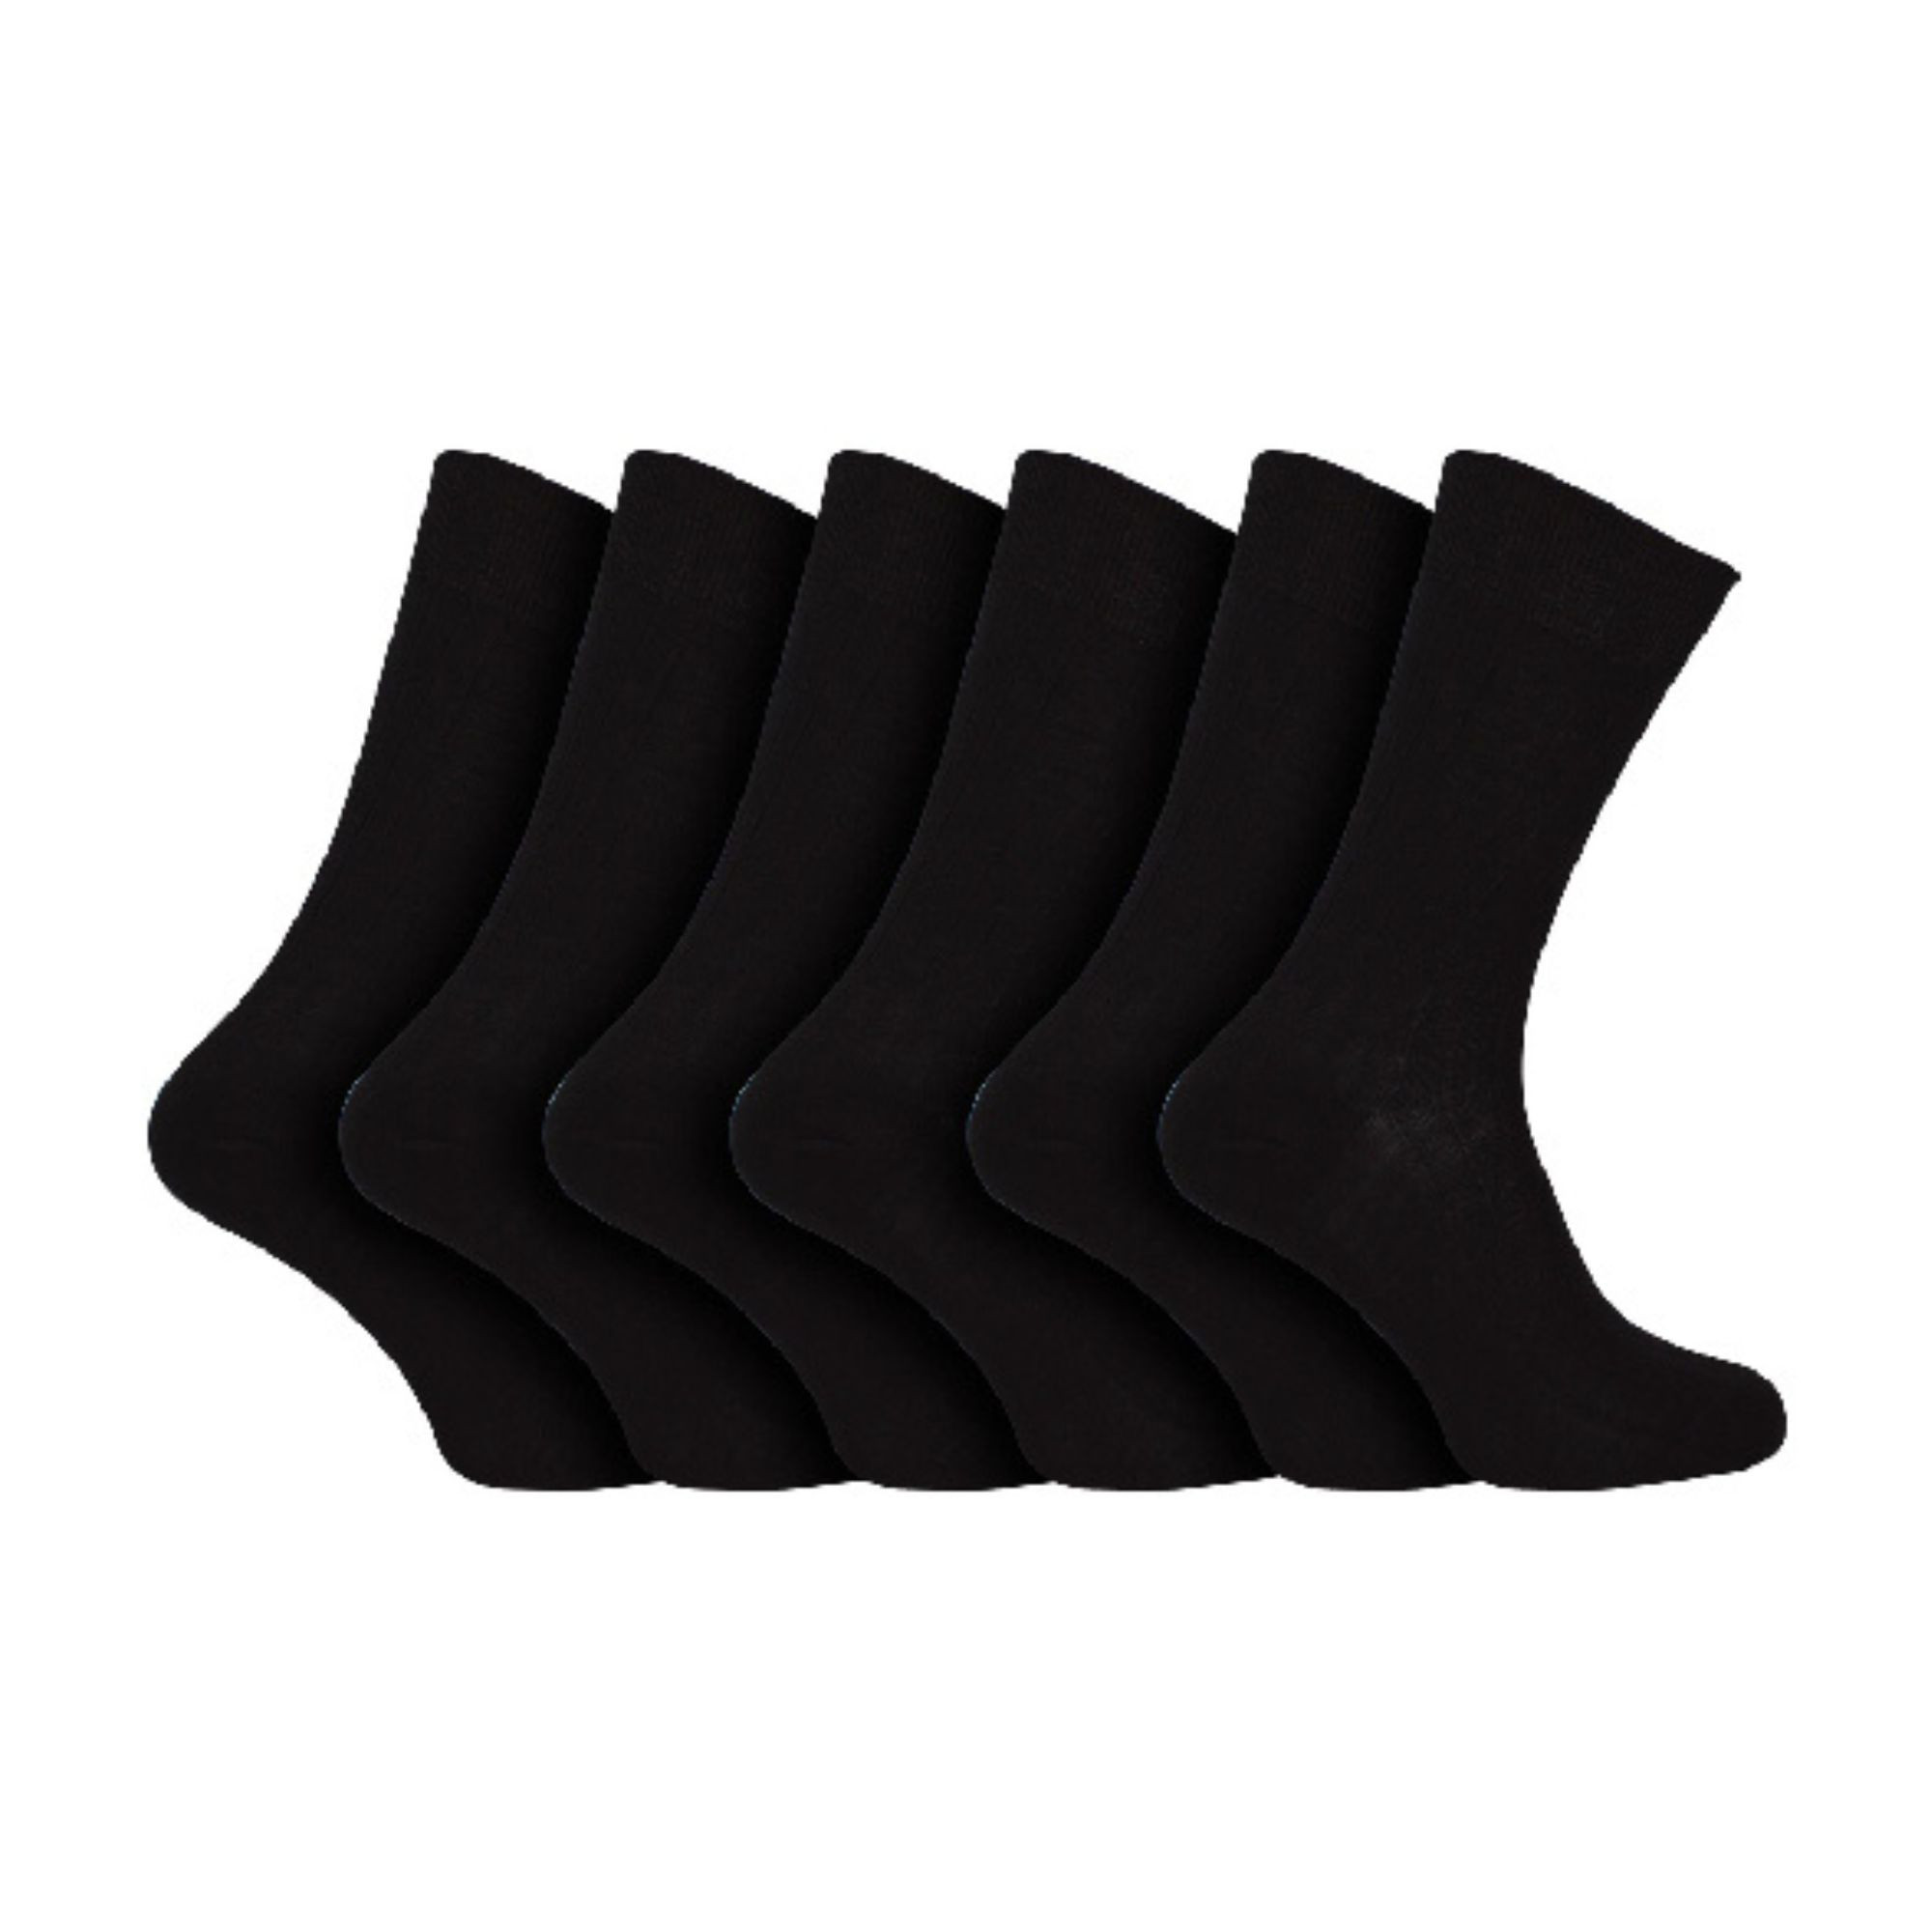 Trainer Socks With Anti Skid Proof Bottoms | 12 Pair Value Pack